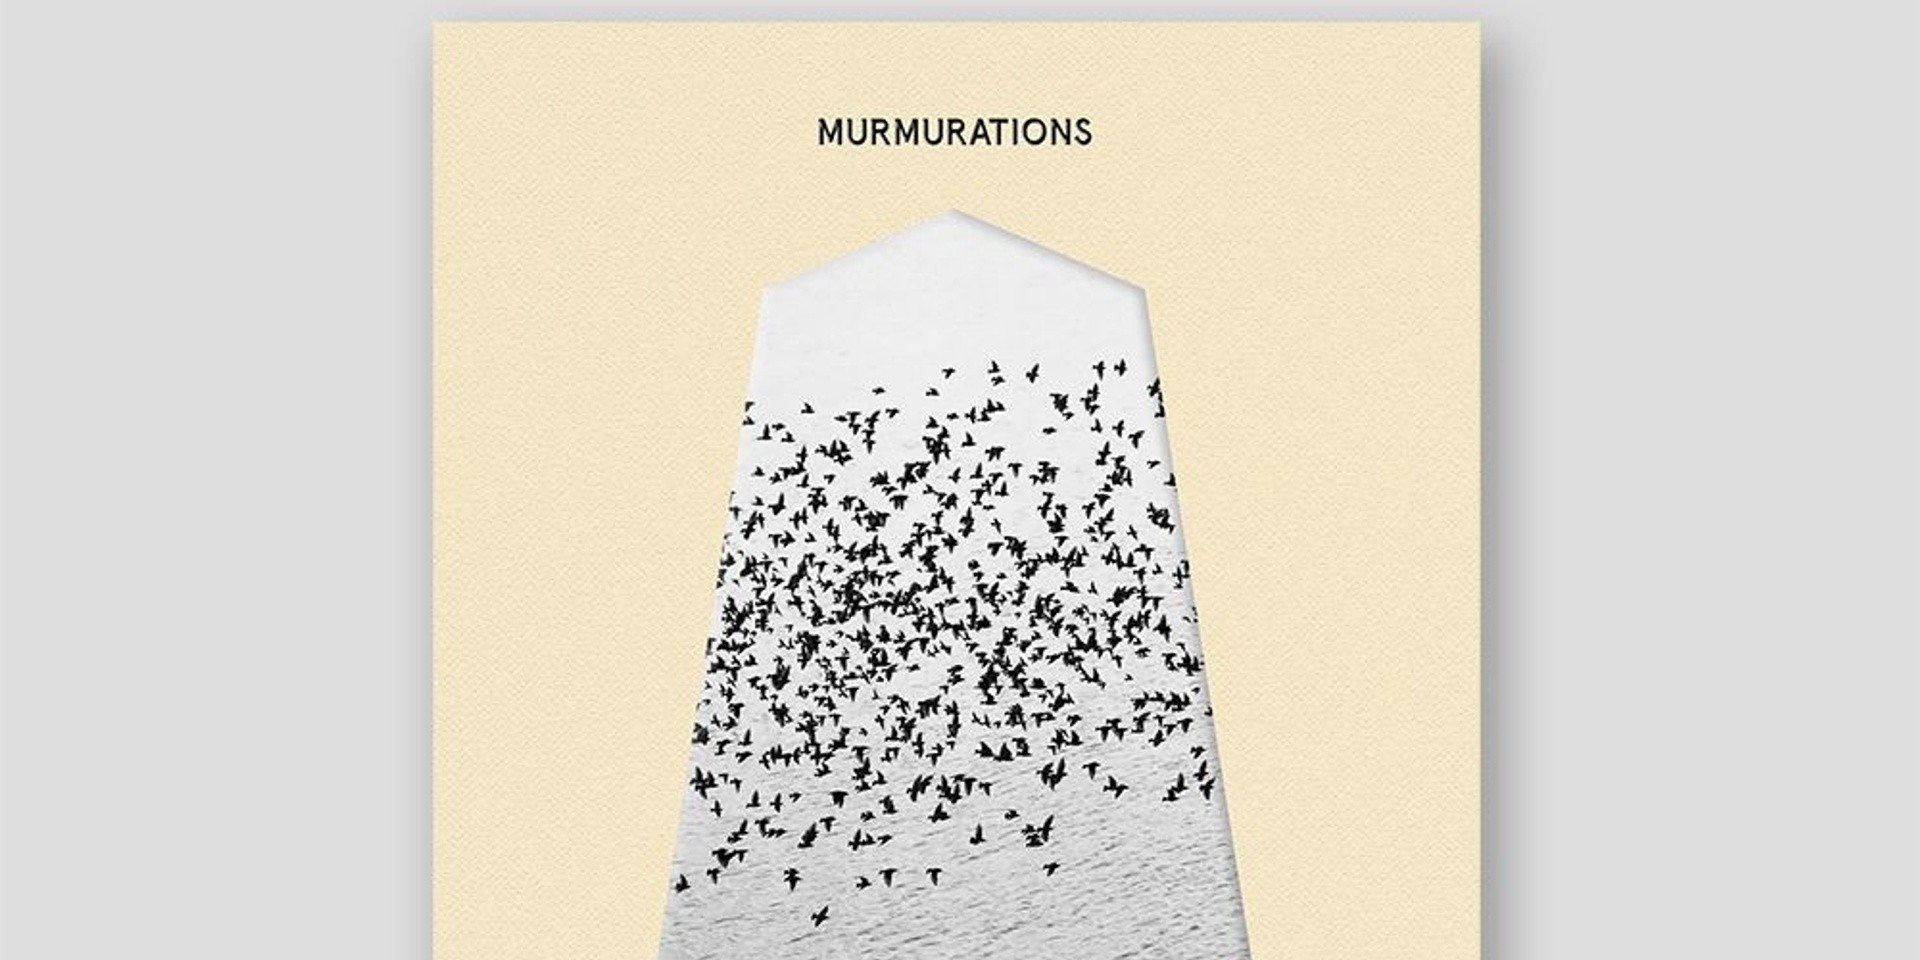 Acclaimed composer sonicbrat to release new acoustic piano album MURMURATIONS on Kitchen. Label